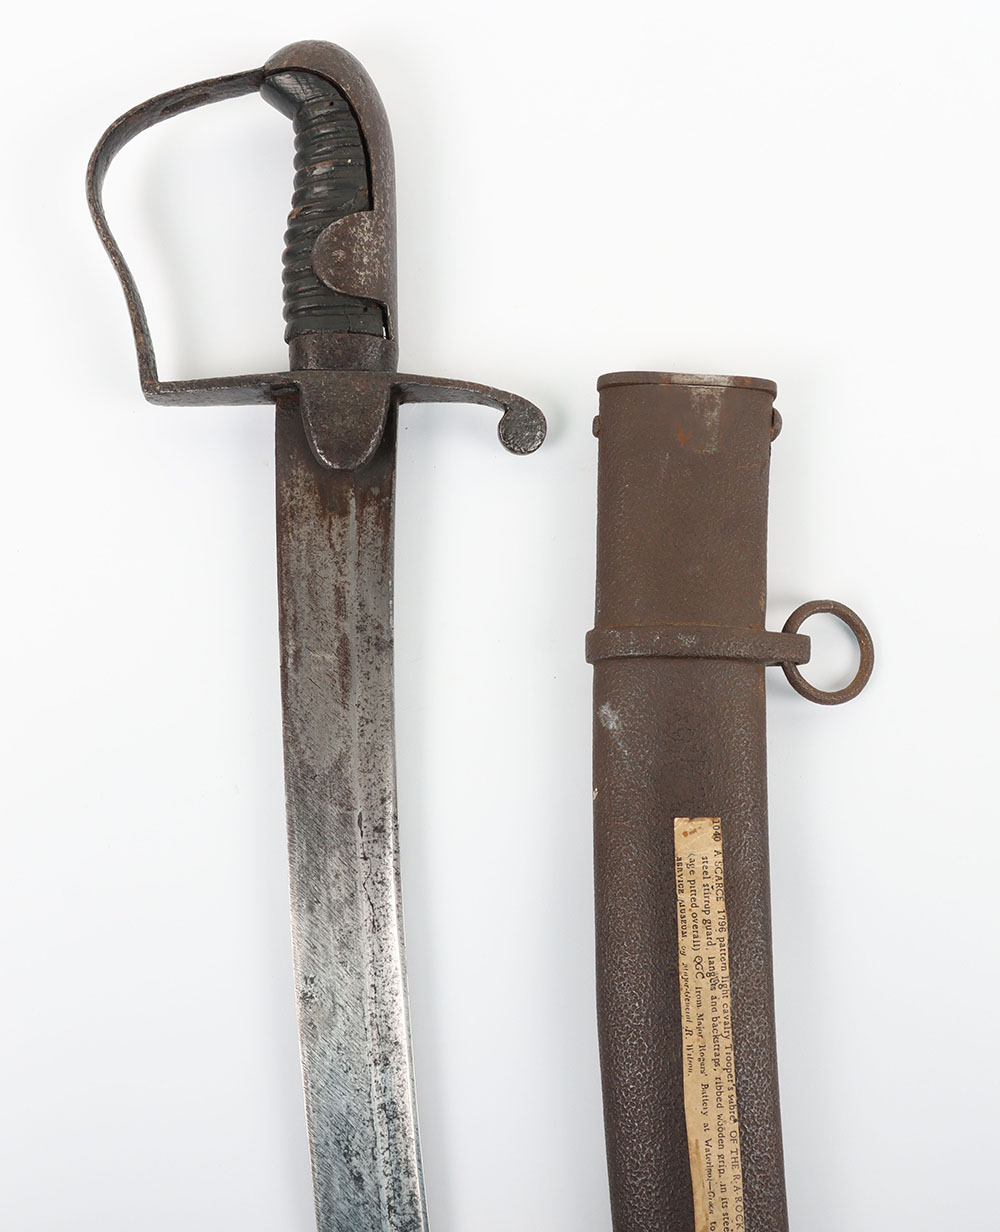 Interesting 1796 Pattern Cavalry Troopers Sword with History Relating to the Major Rogers Rocket Bat